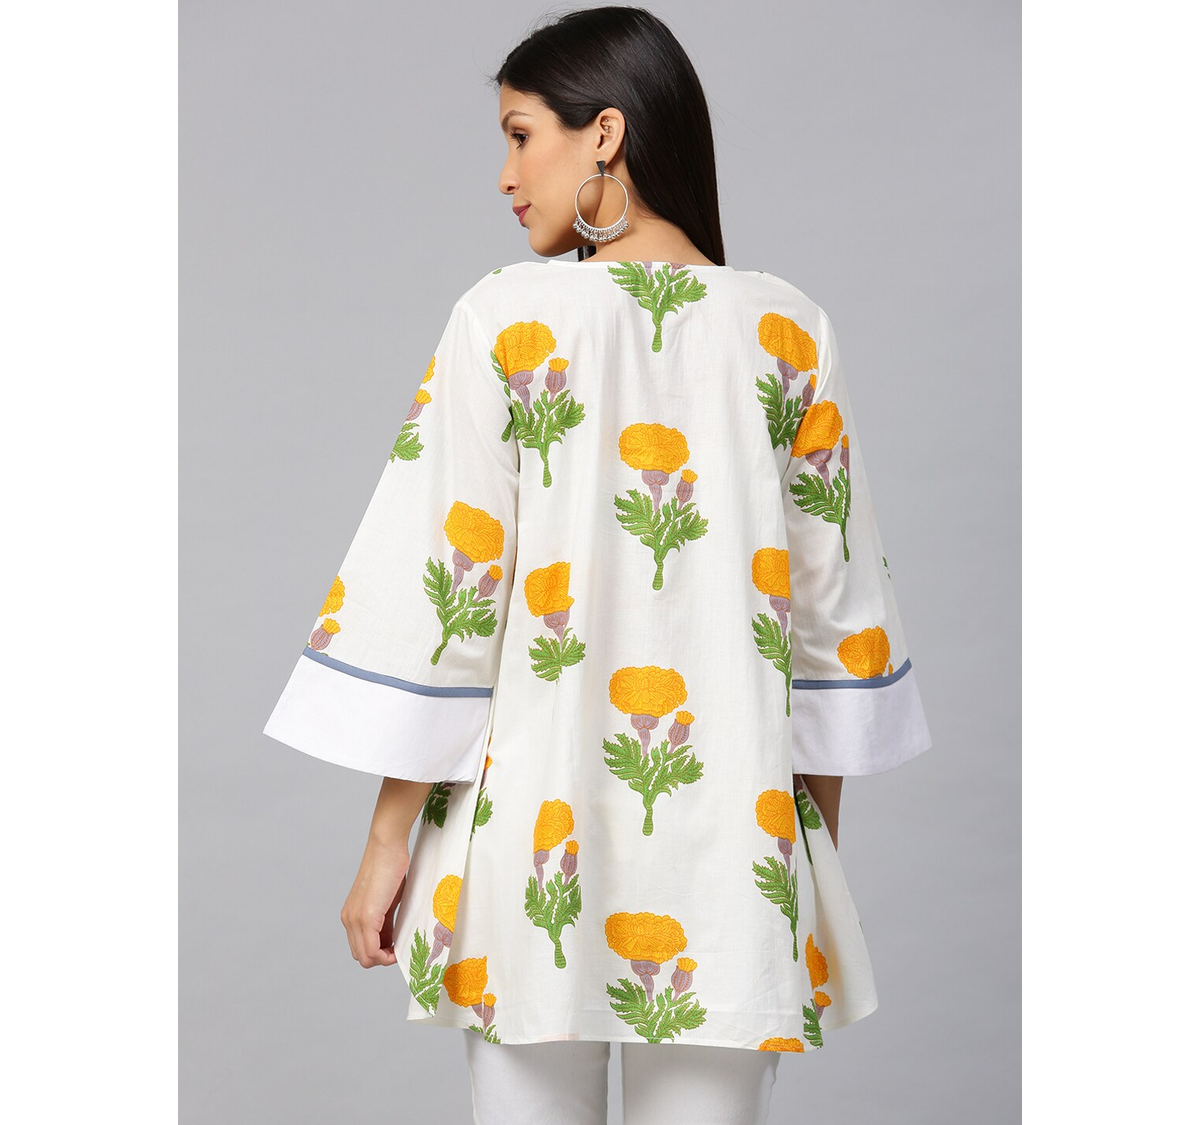 Women's  Off-White & Yellow Printed A-Line High-Low Kurti - Wahe-NOOR